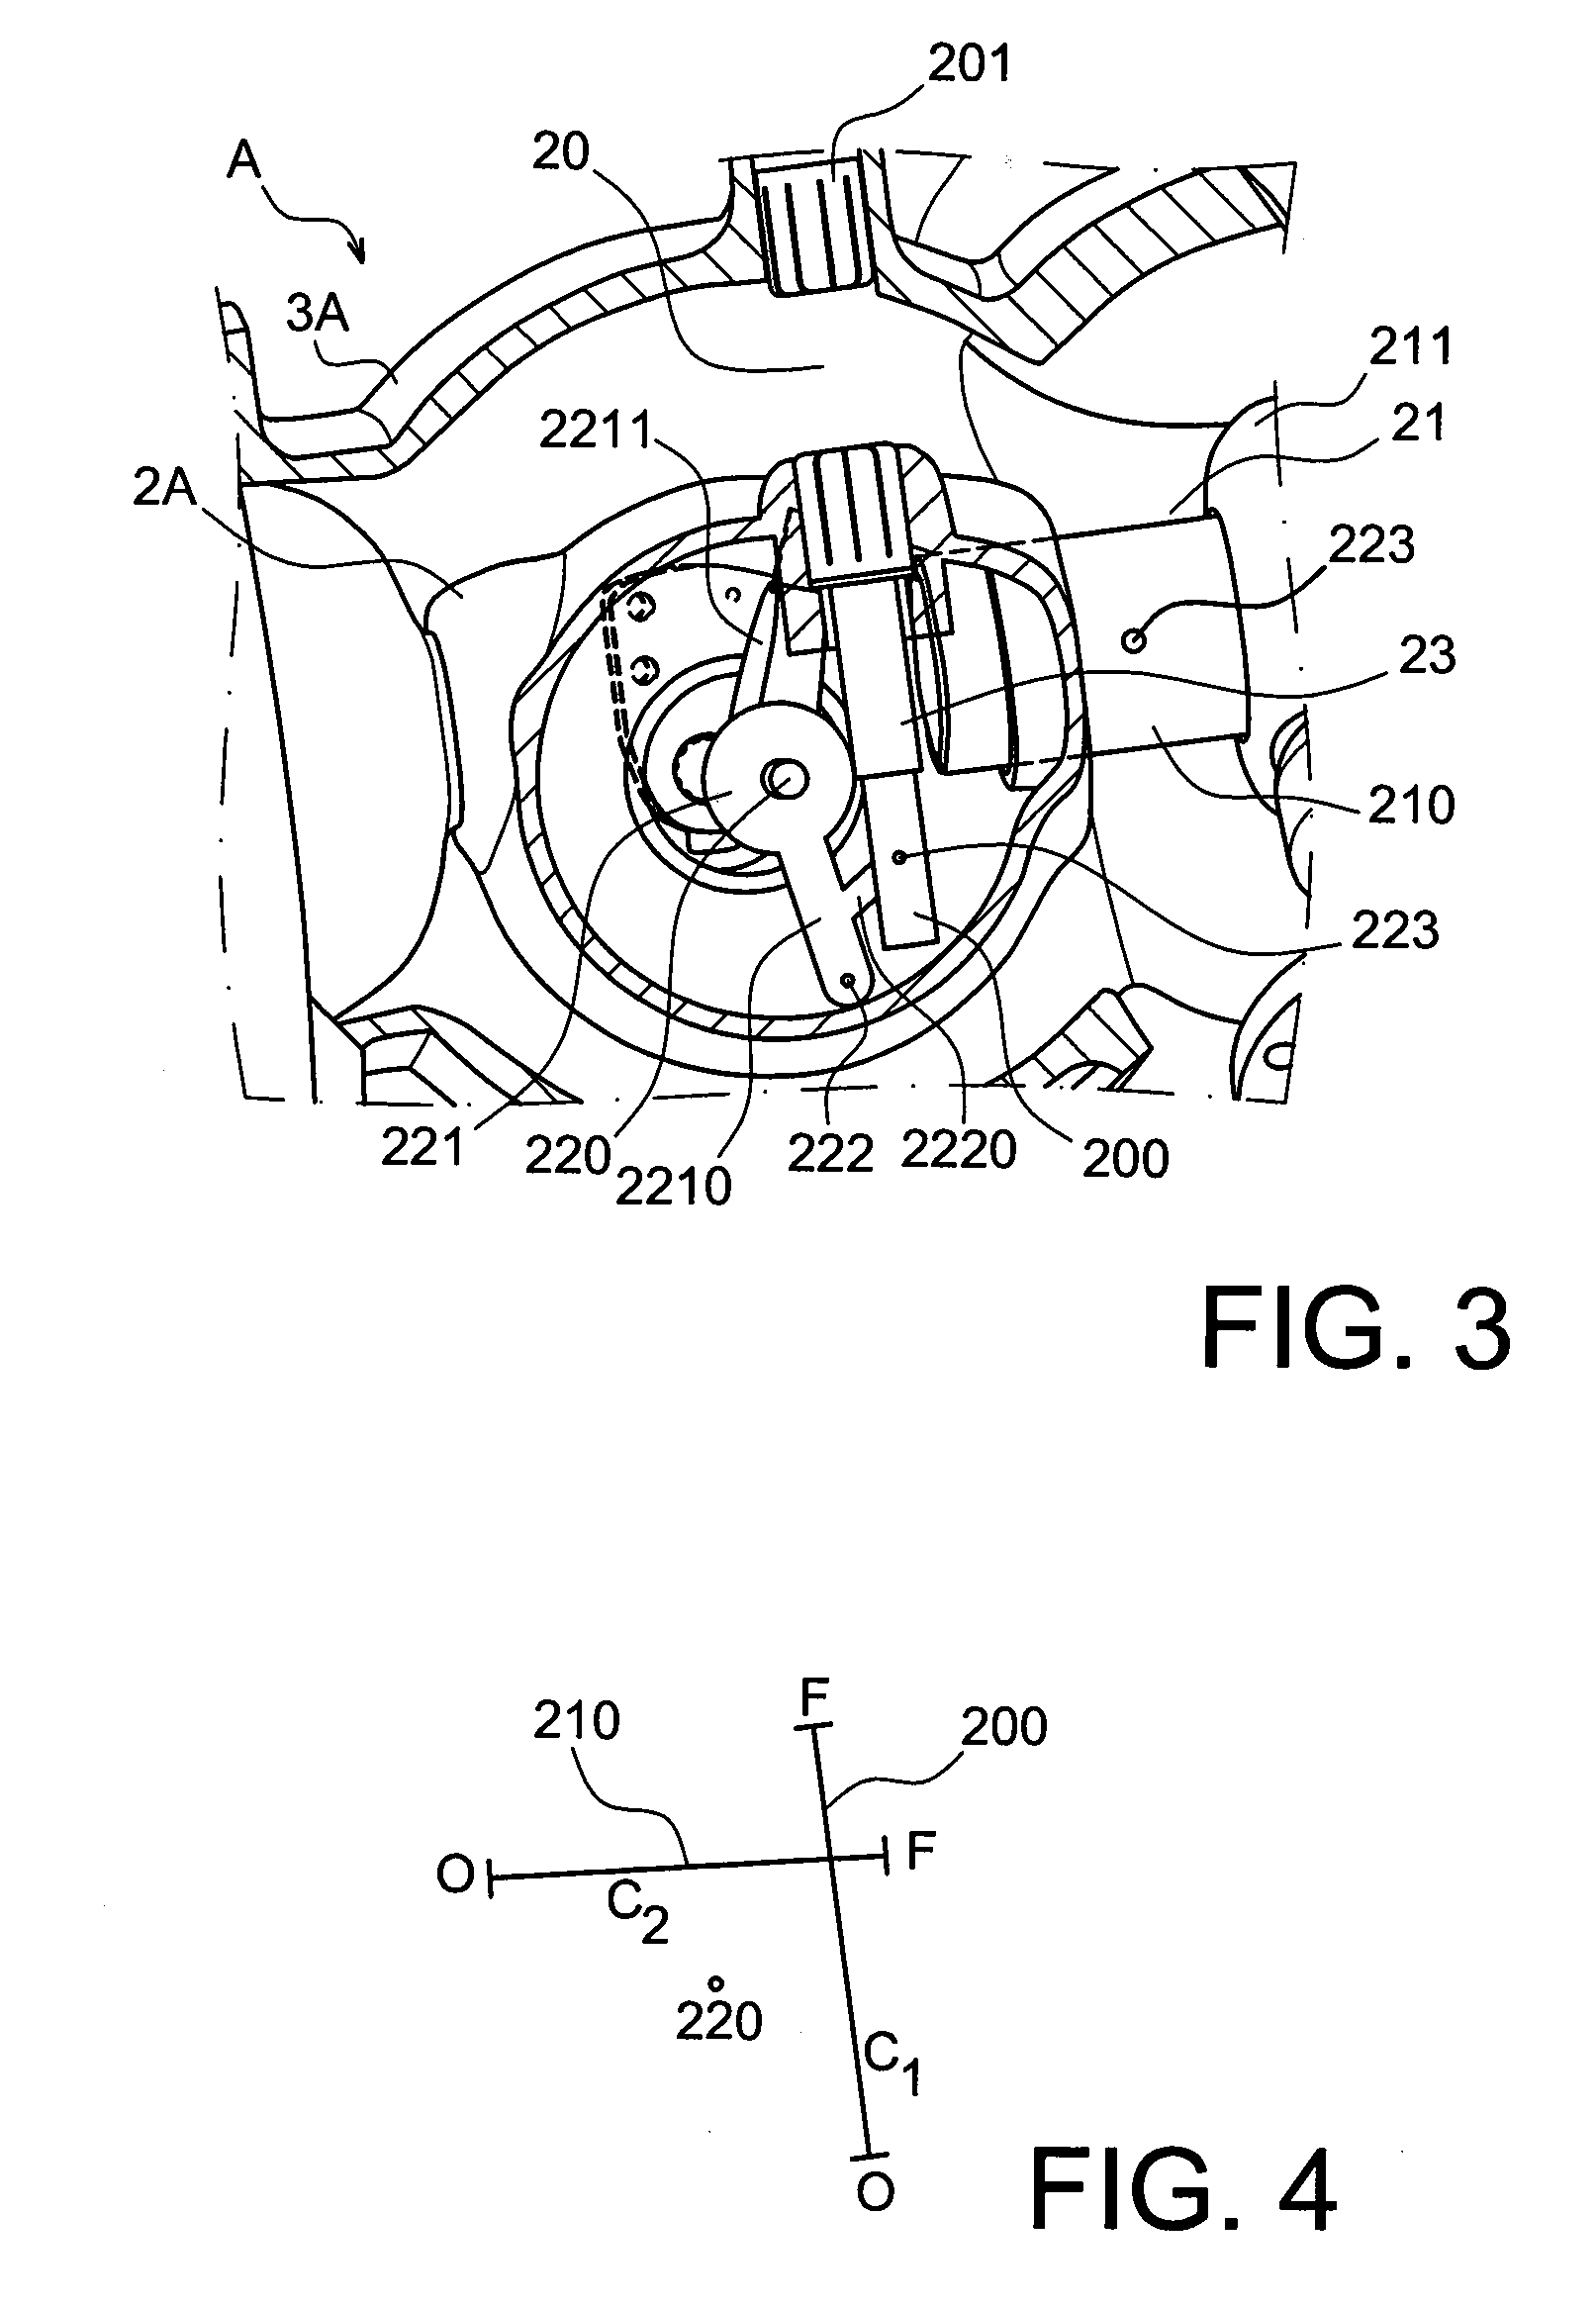 Electrical switch apparatus having two interrupters, such as a busbar disconnector and a grounding disconnector, and including common actuator means for the movable contacts of the interrupters